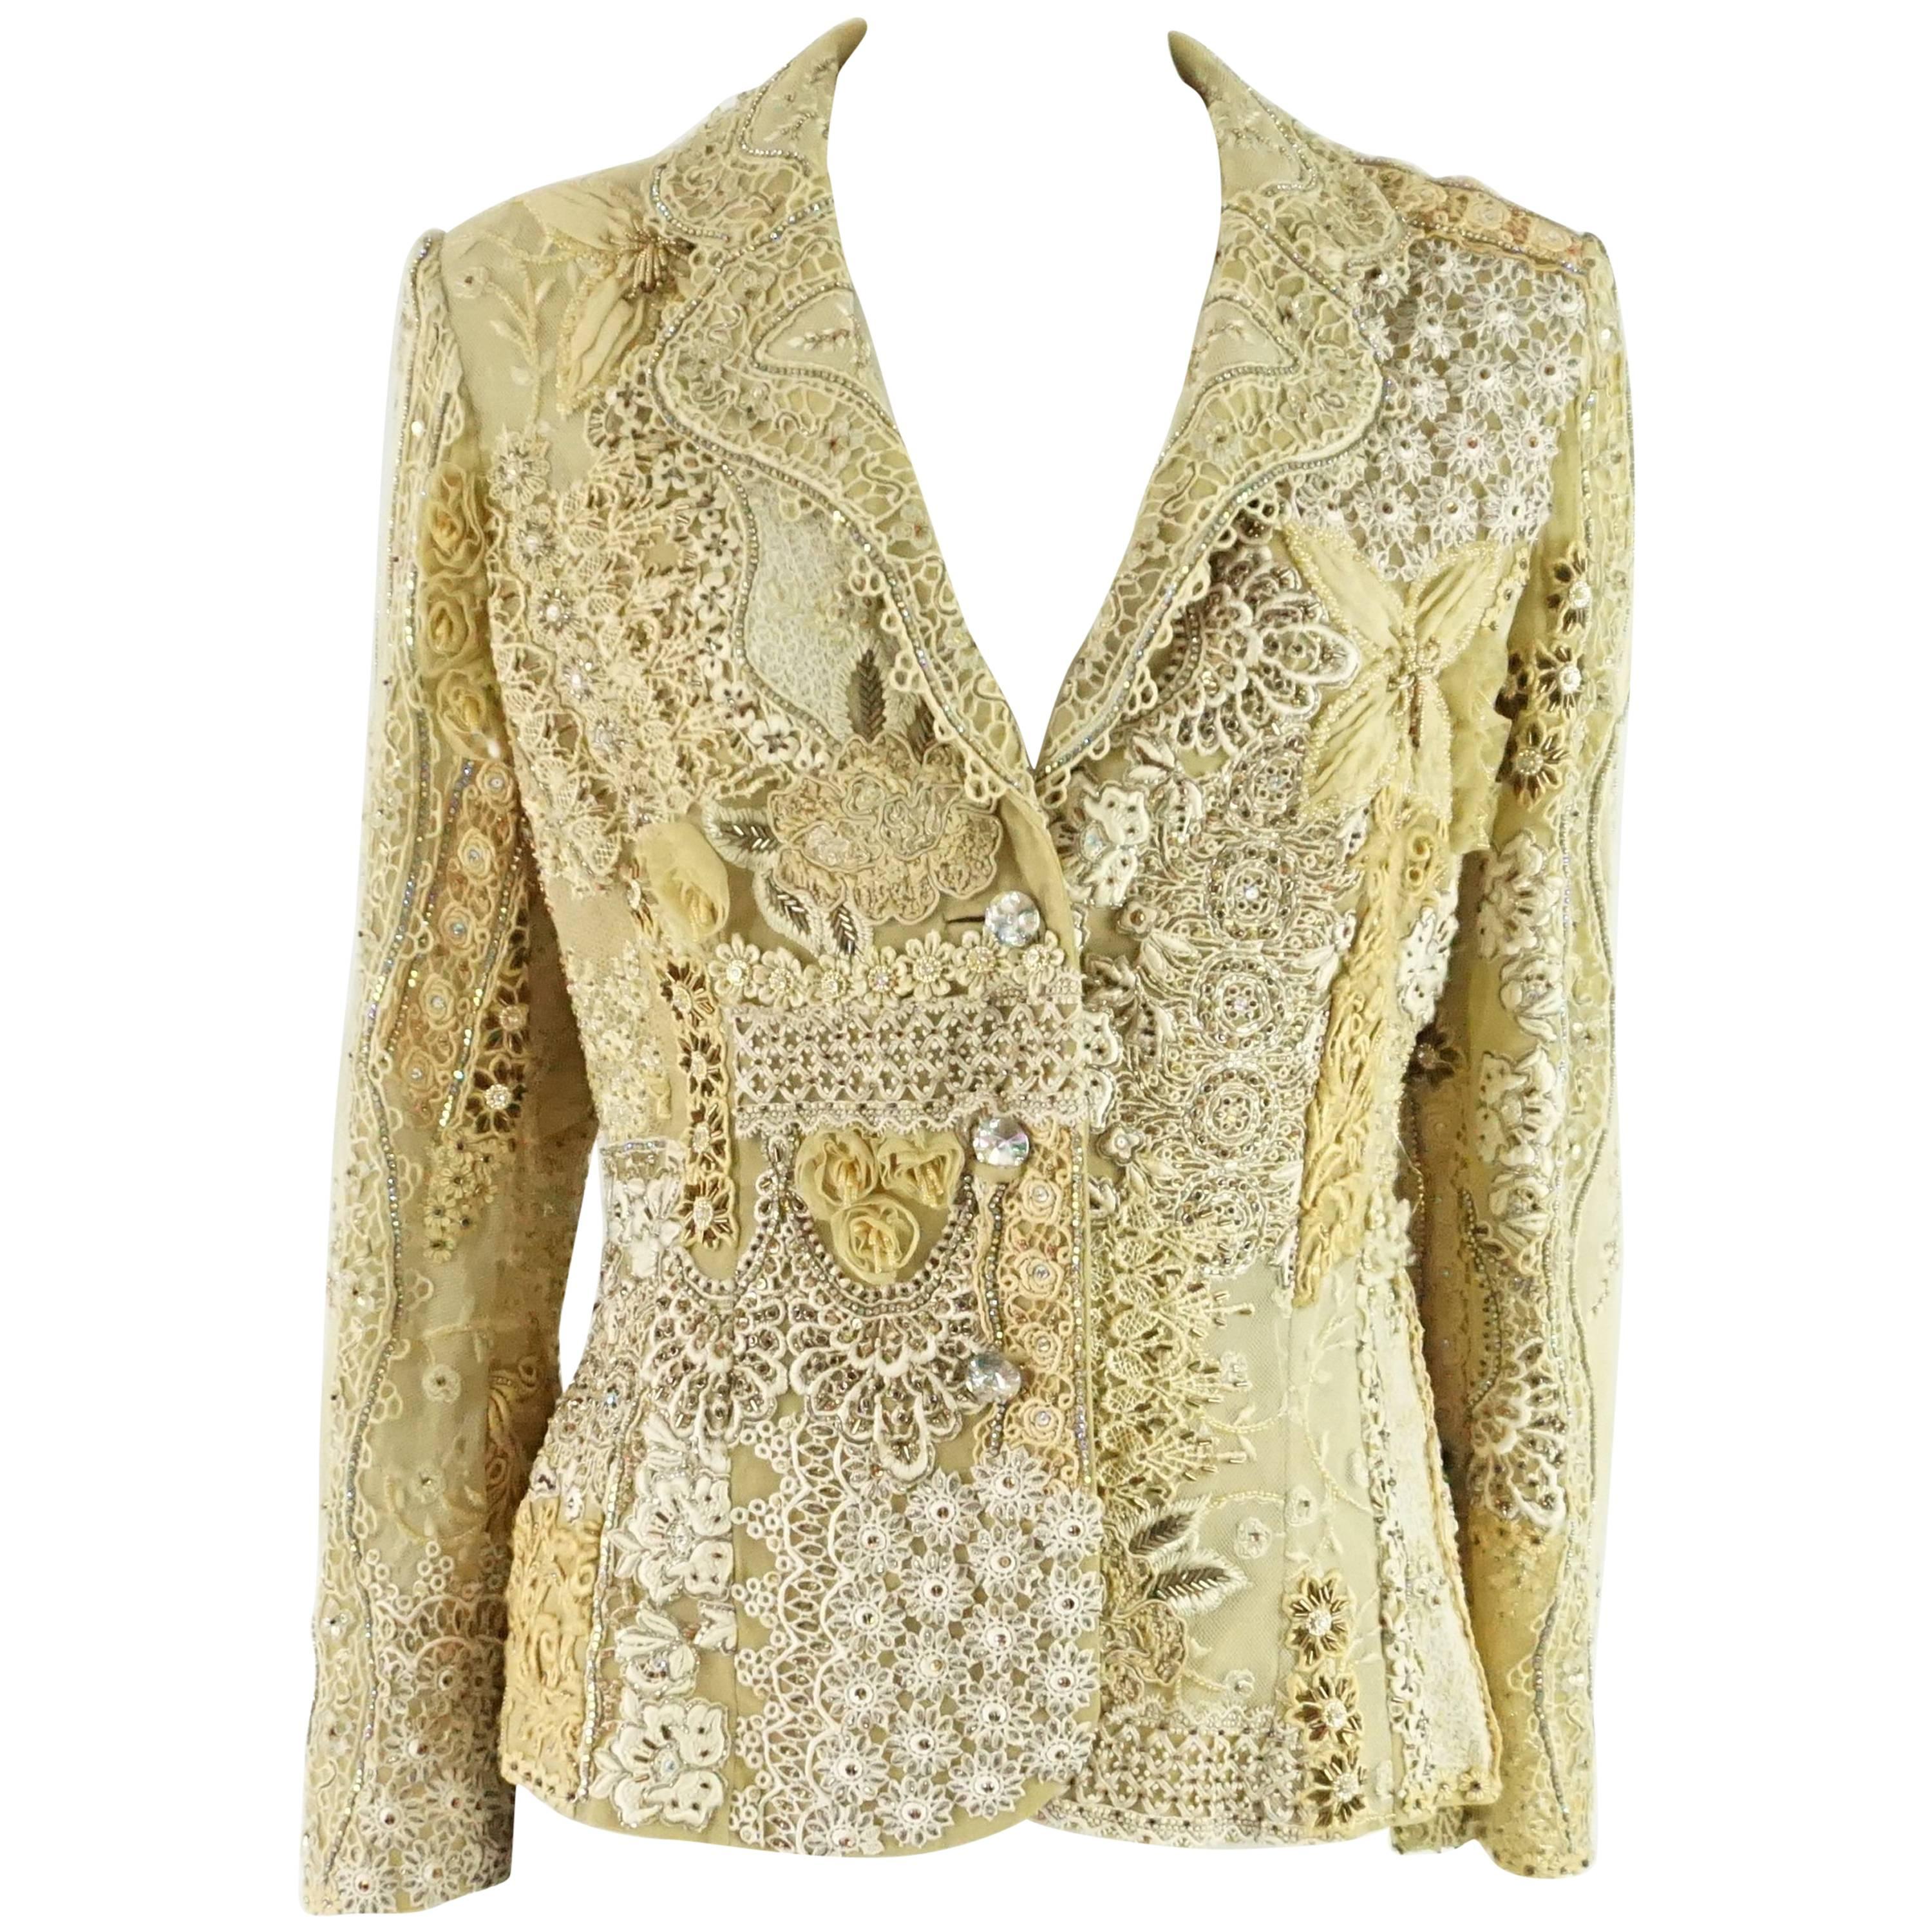 Ella Singh Cream Lace and Embroidered Jacket with Rhinestones - 36 - 1990's 